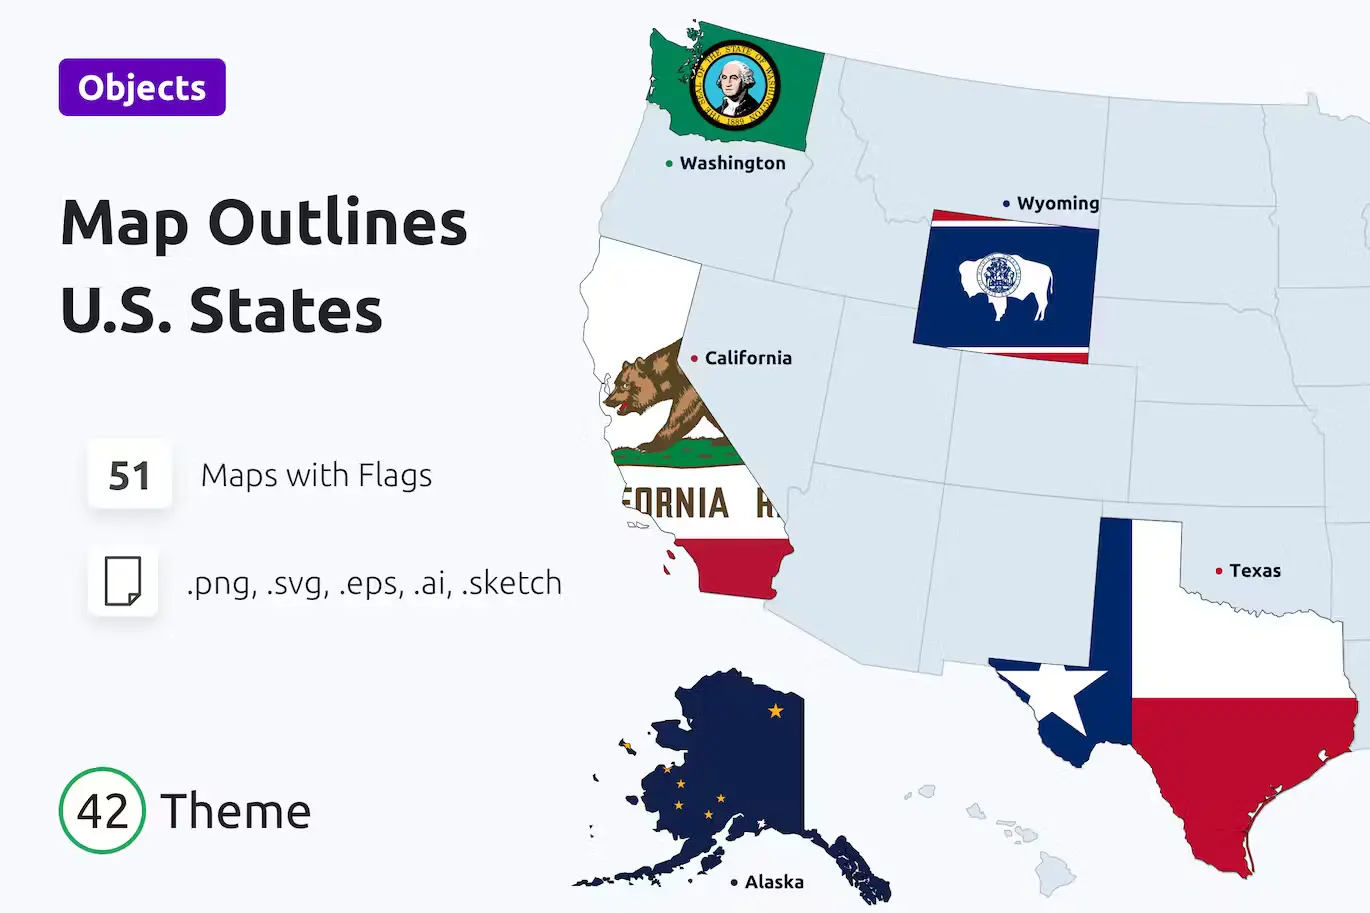 US States Map Outlines with Flags